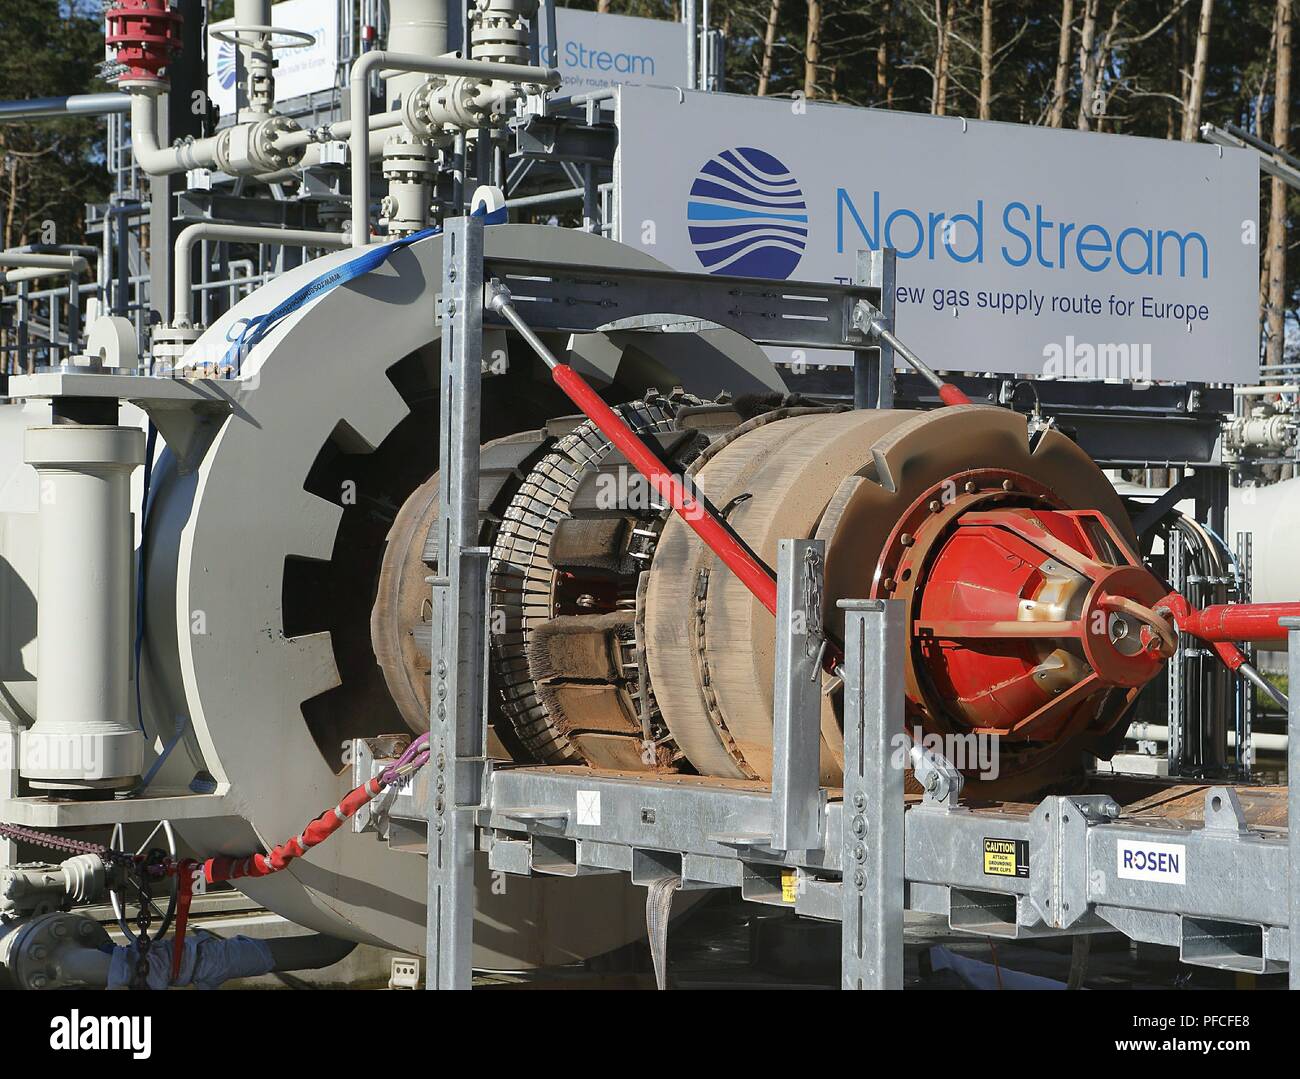 Russia. 21st Aug, 2018. This intelligent Pipeline Inspection Gauge (PIG)  was specifically developed for the Nord Stream Pipelines by Rosen Group,  based in Lingen, Germany. The intelligent PIG is used for internal